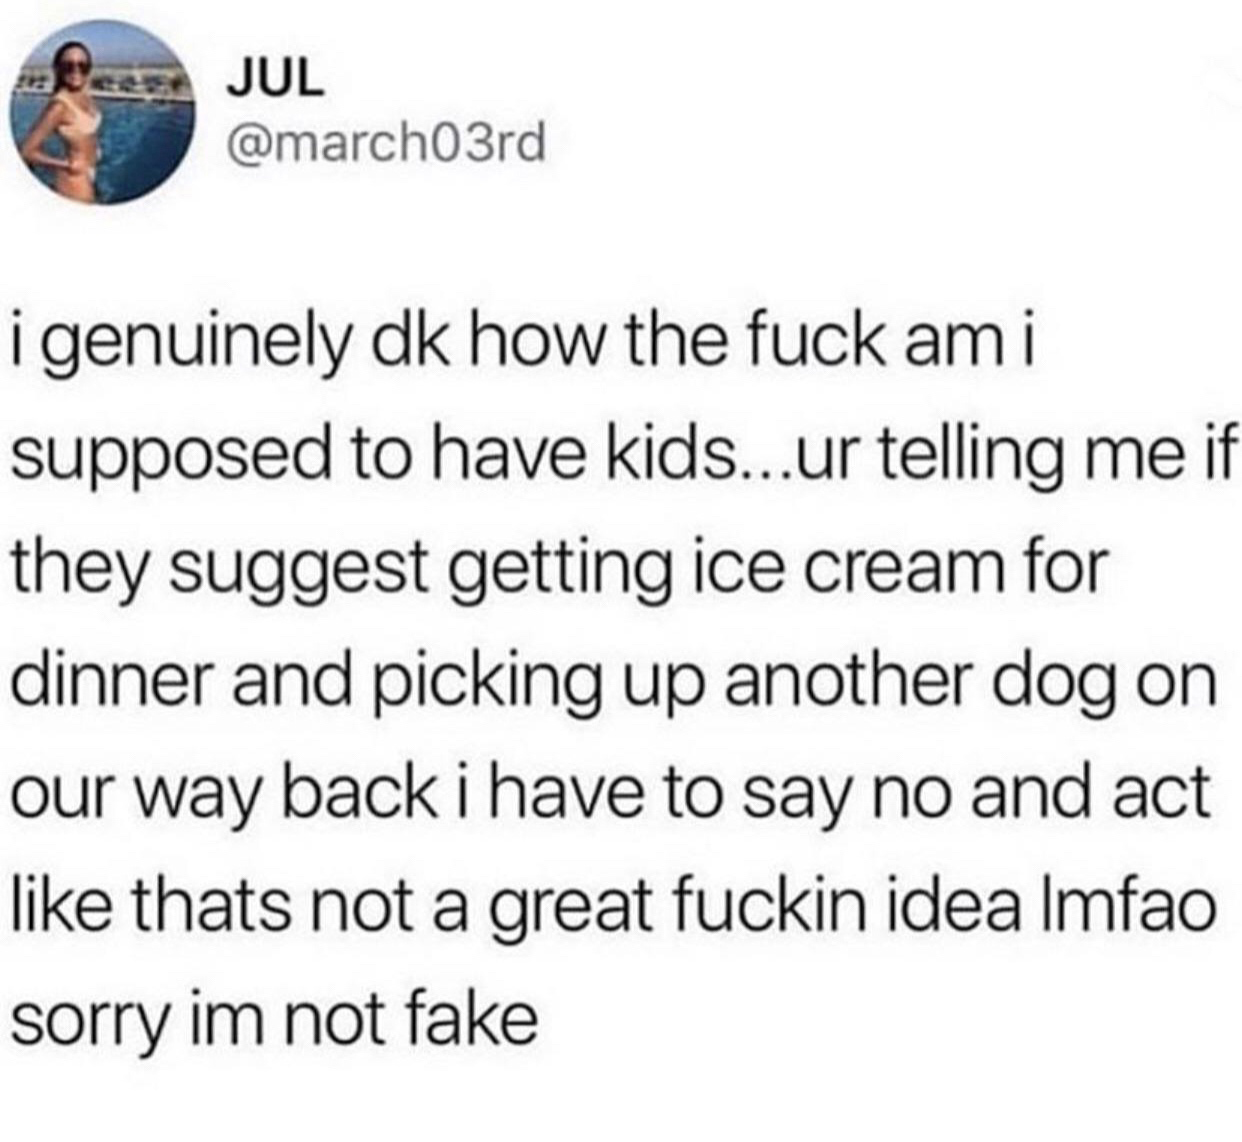 document - Jul i genuinely dk how the fuck ami supposed to have kids...ur telling me if they suggest getting ice cream for dinner and picking up another dog on our way back i have to say no and act thats not a great fuckin idea Imfao sorry im not fake